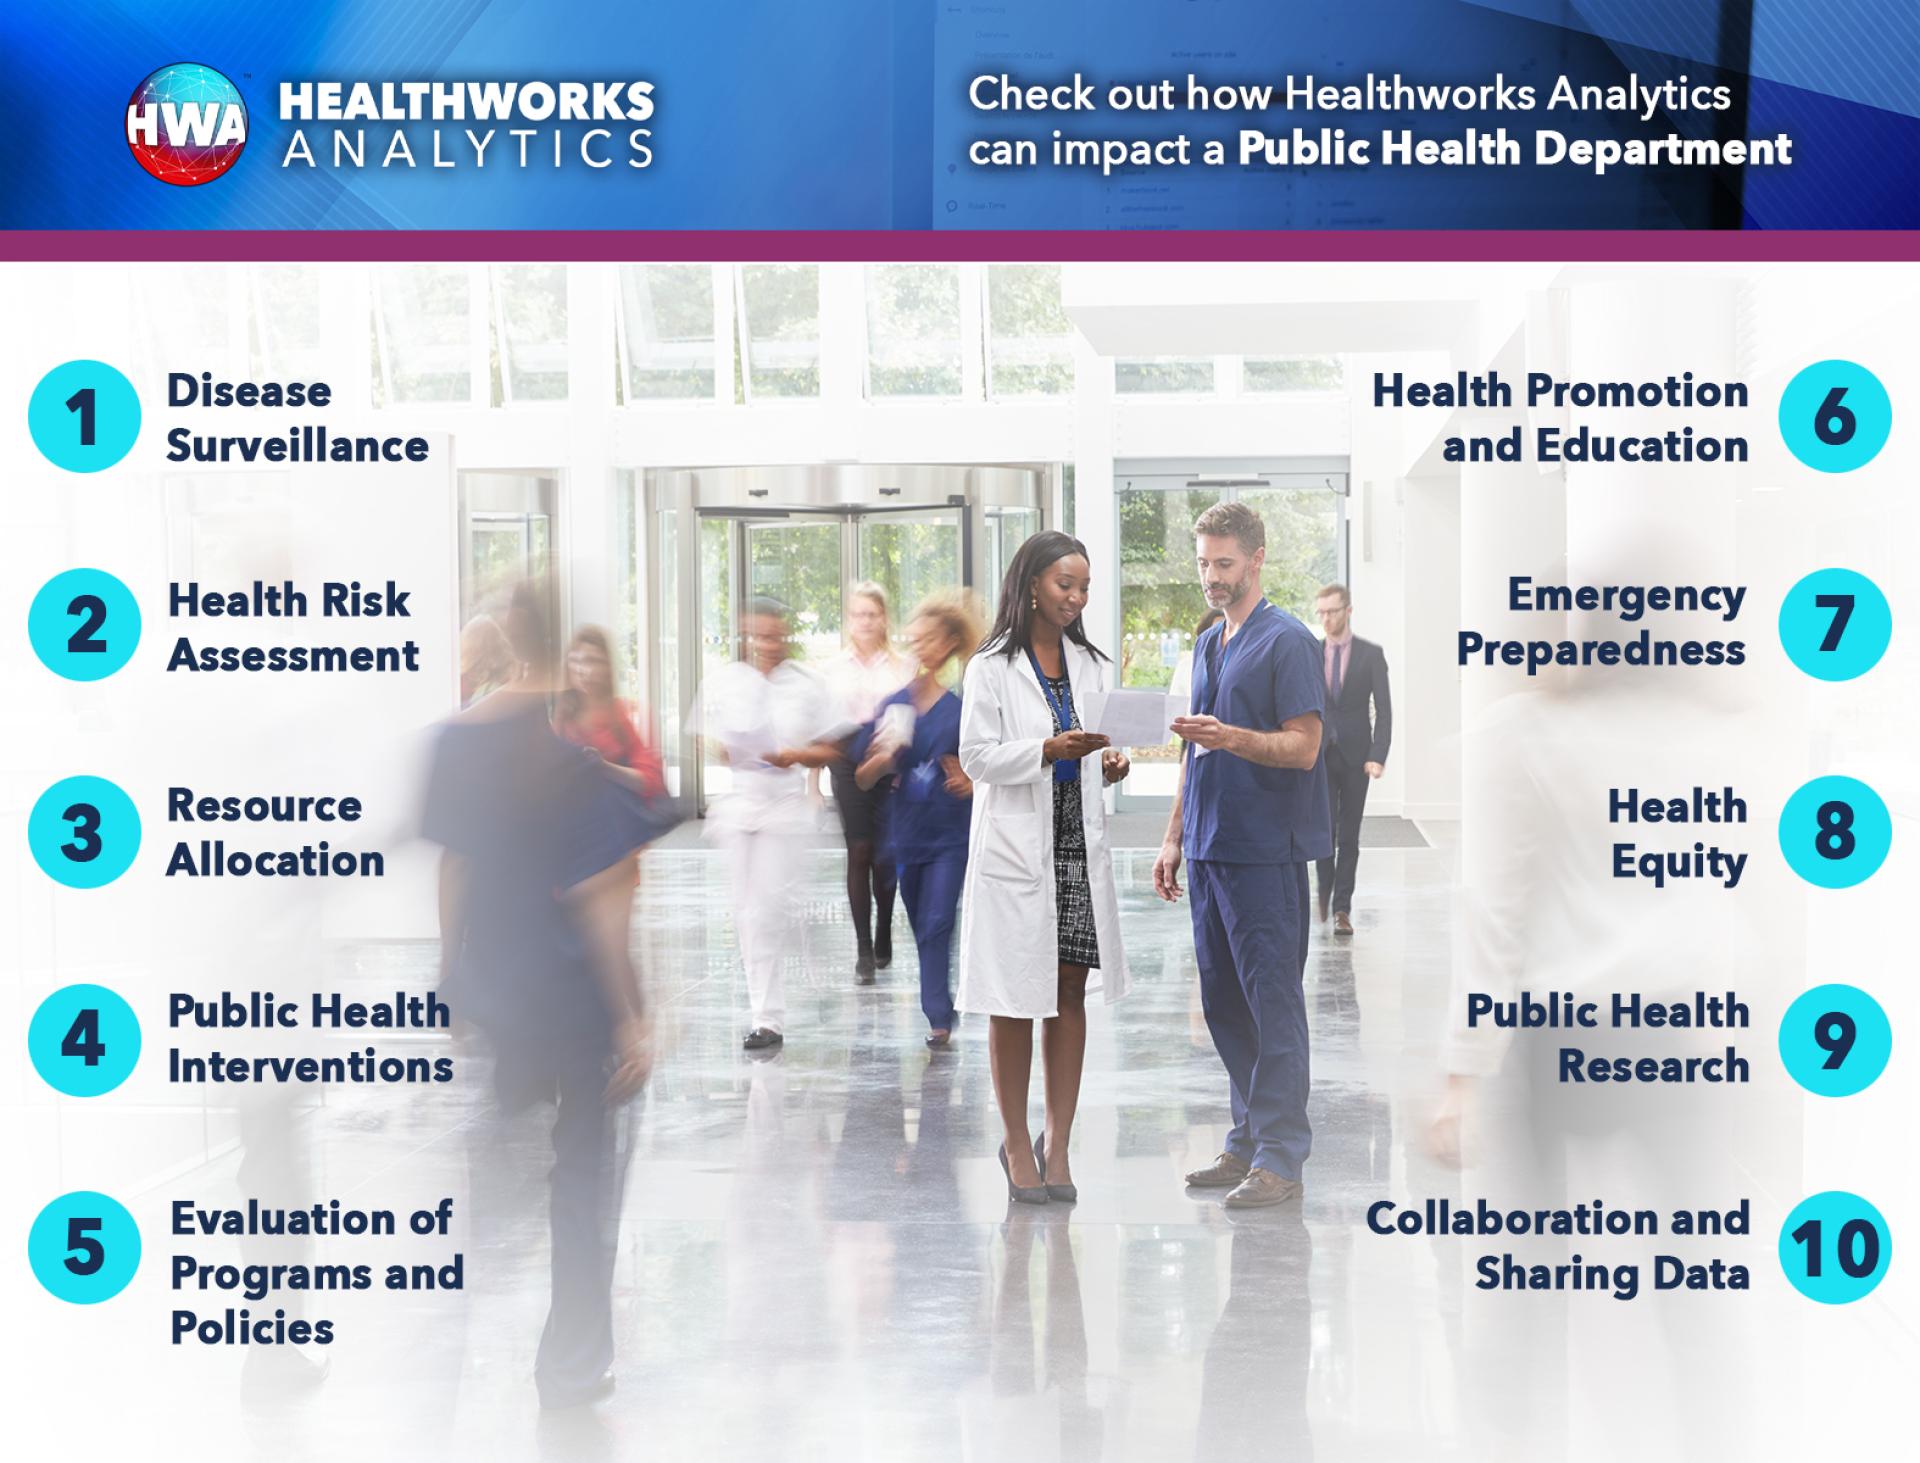 Check-out-how-Healthworks-Analytics-can-impact-Public-Health-Departments---F